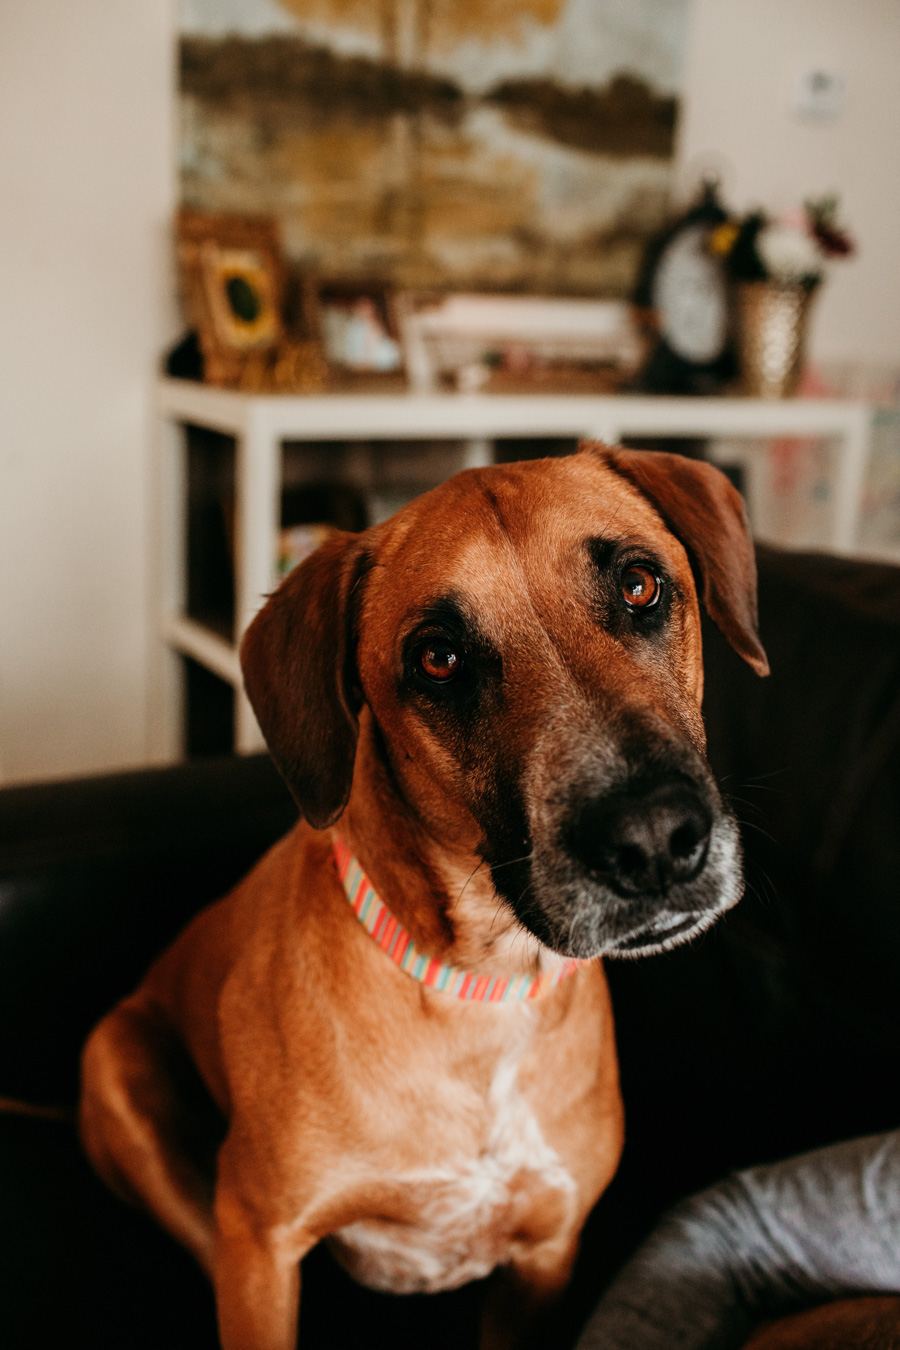 A dog, looking at the camera with a tilted head